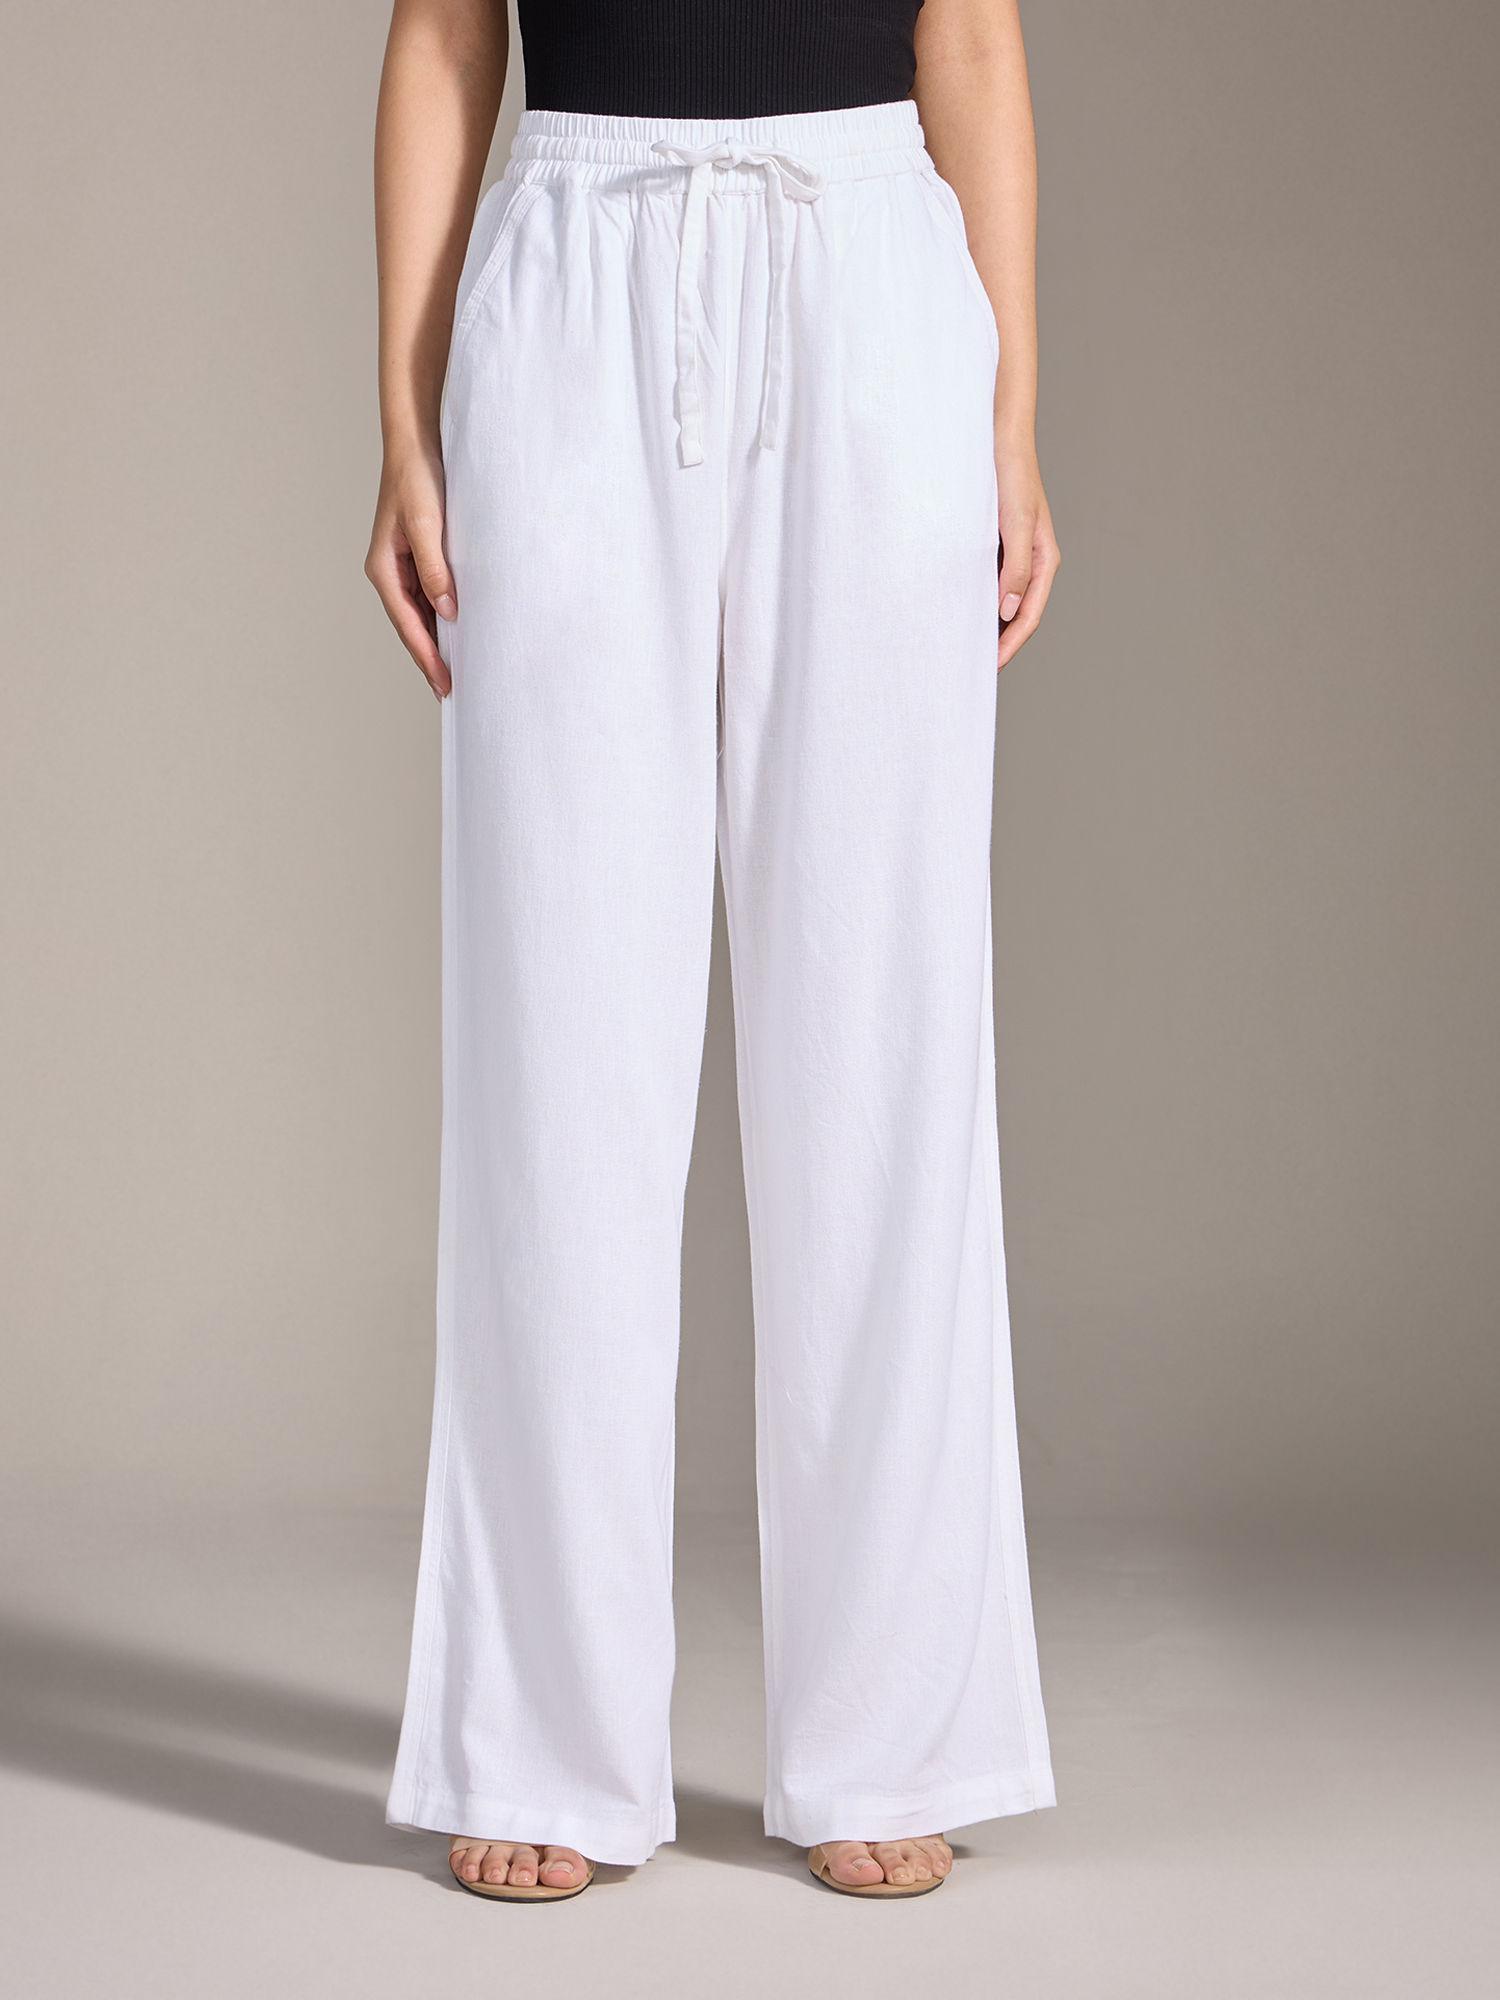 white solid mid waist straight linen pants